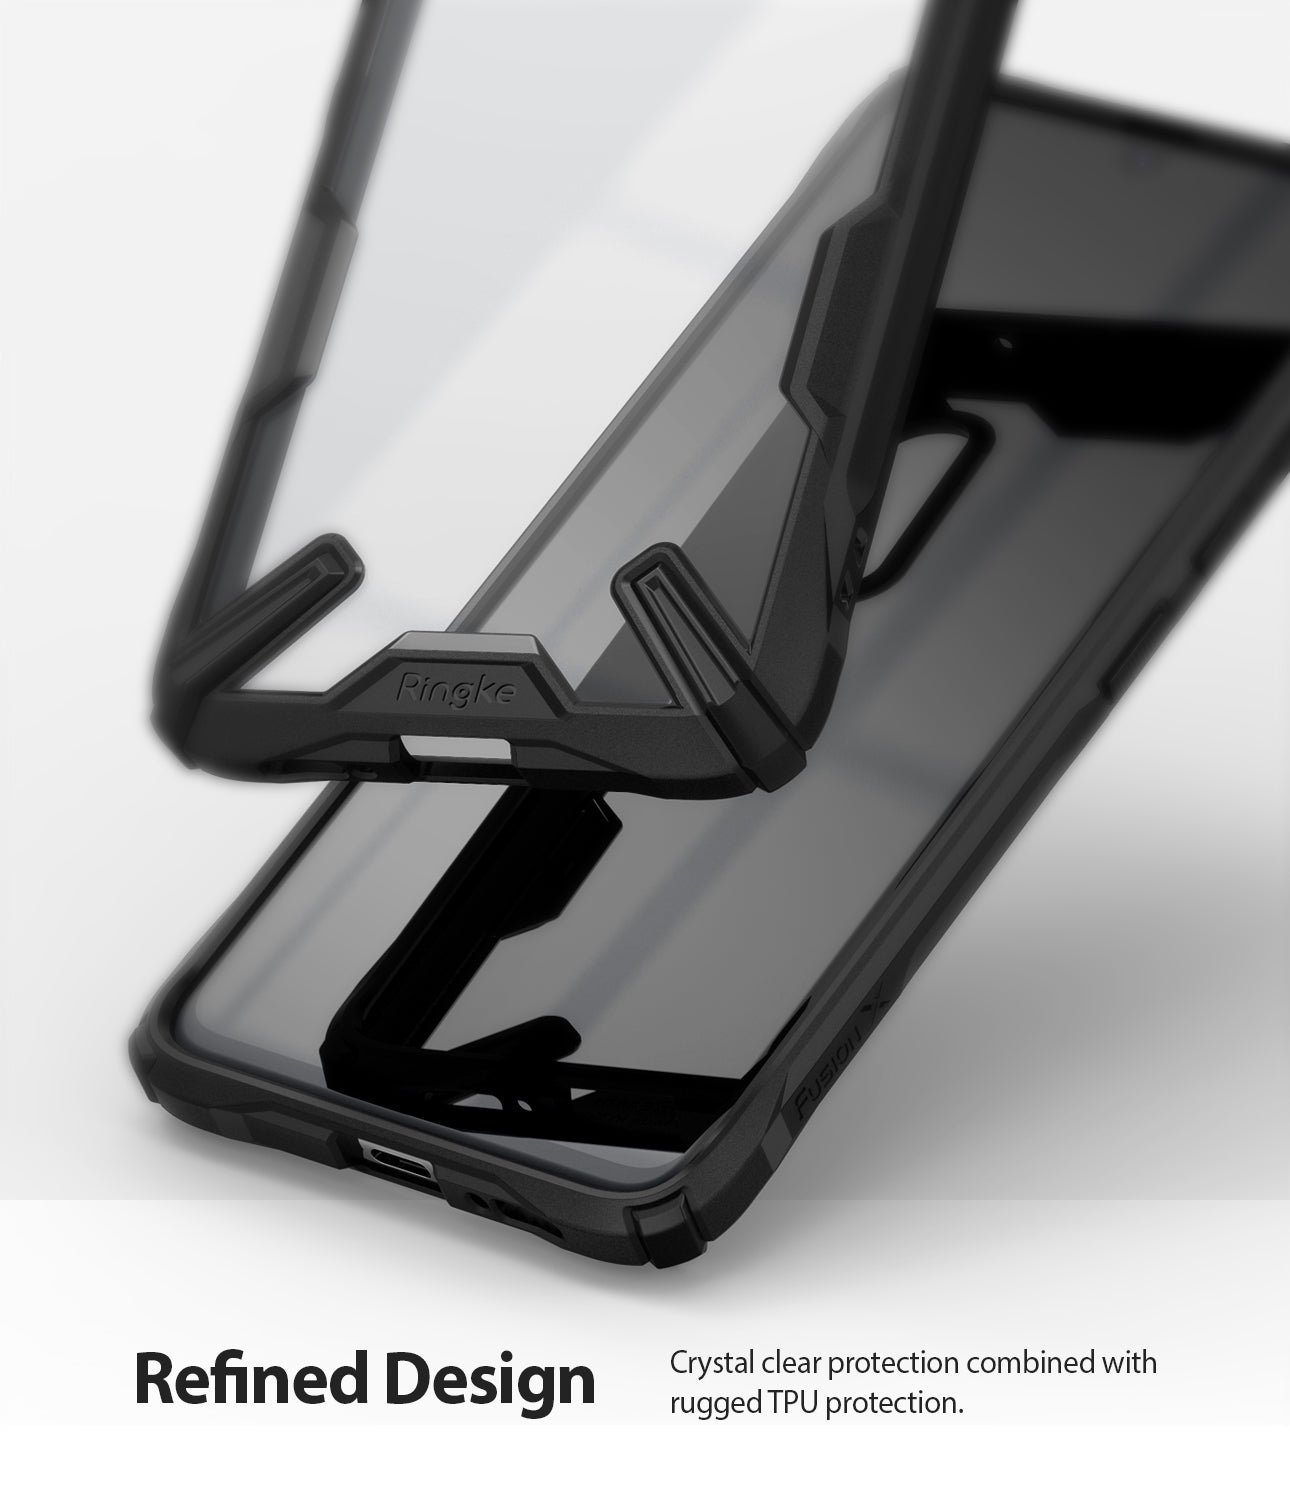 crystal clear protection combined with rugged tpu bumper